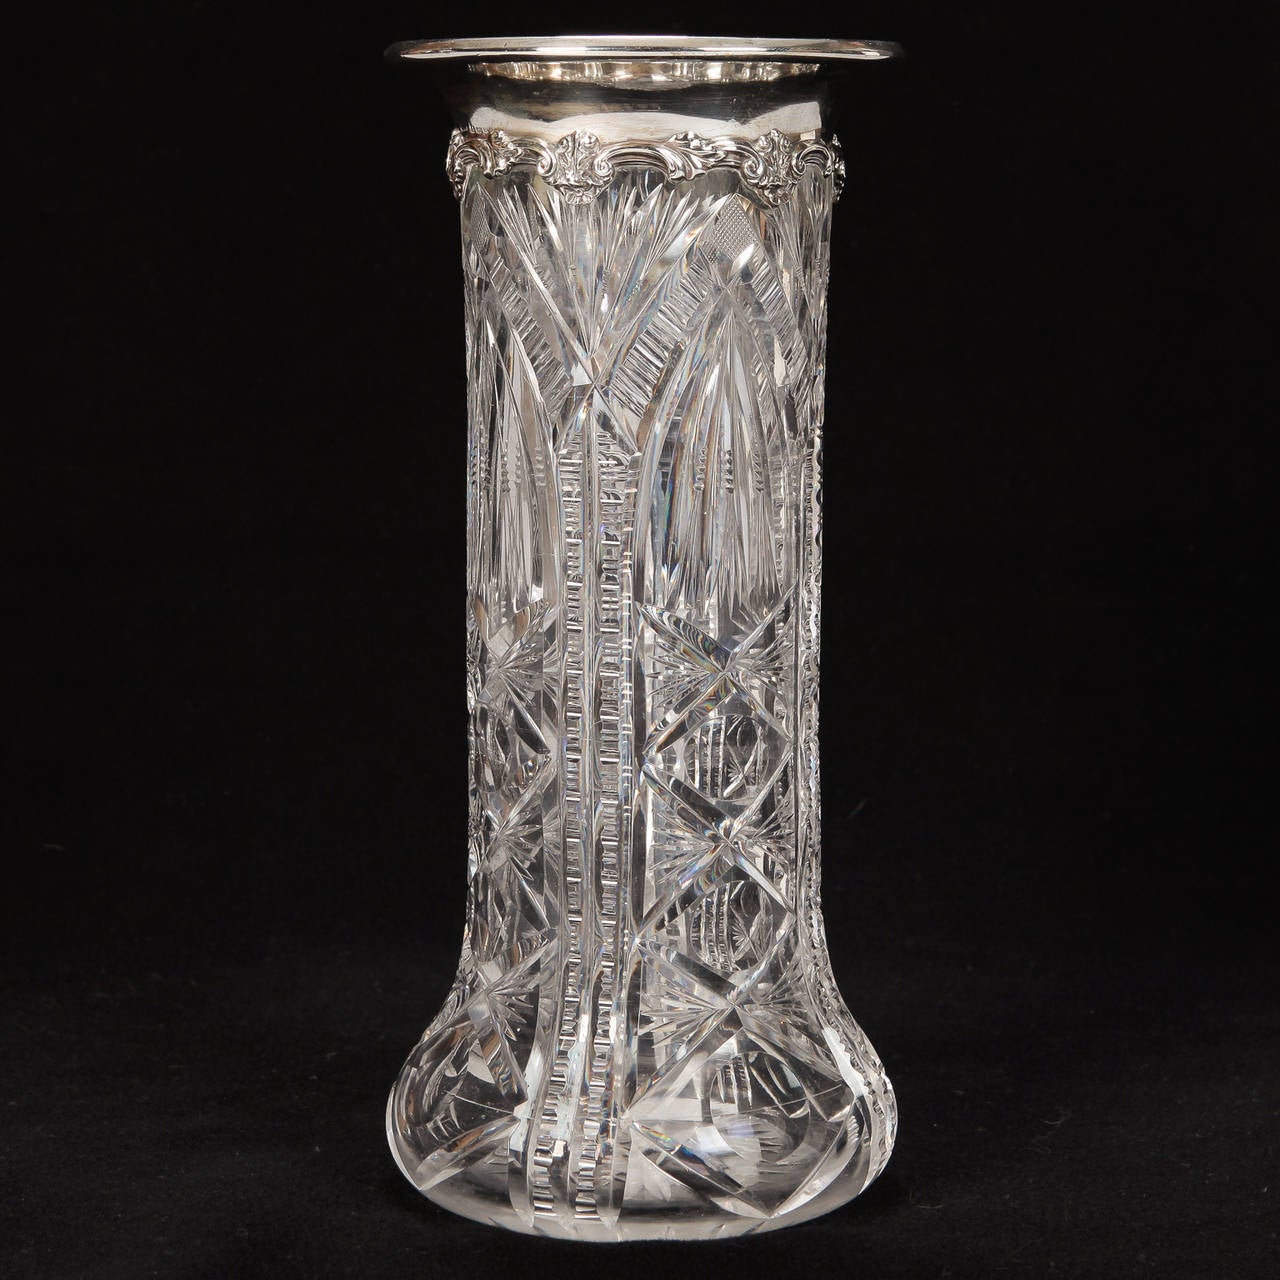 European Heavy Carved Crystal Vase with Sterling Silver Rim